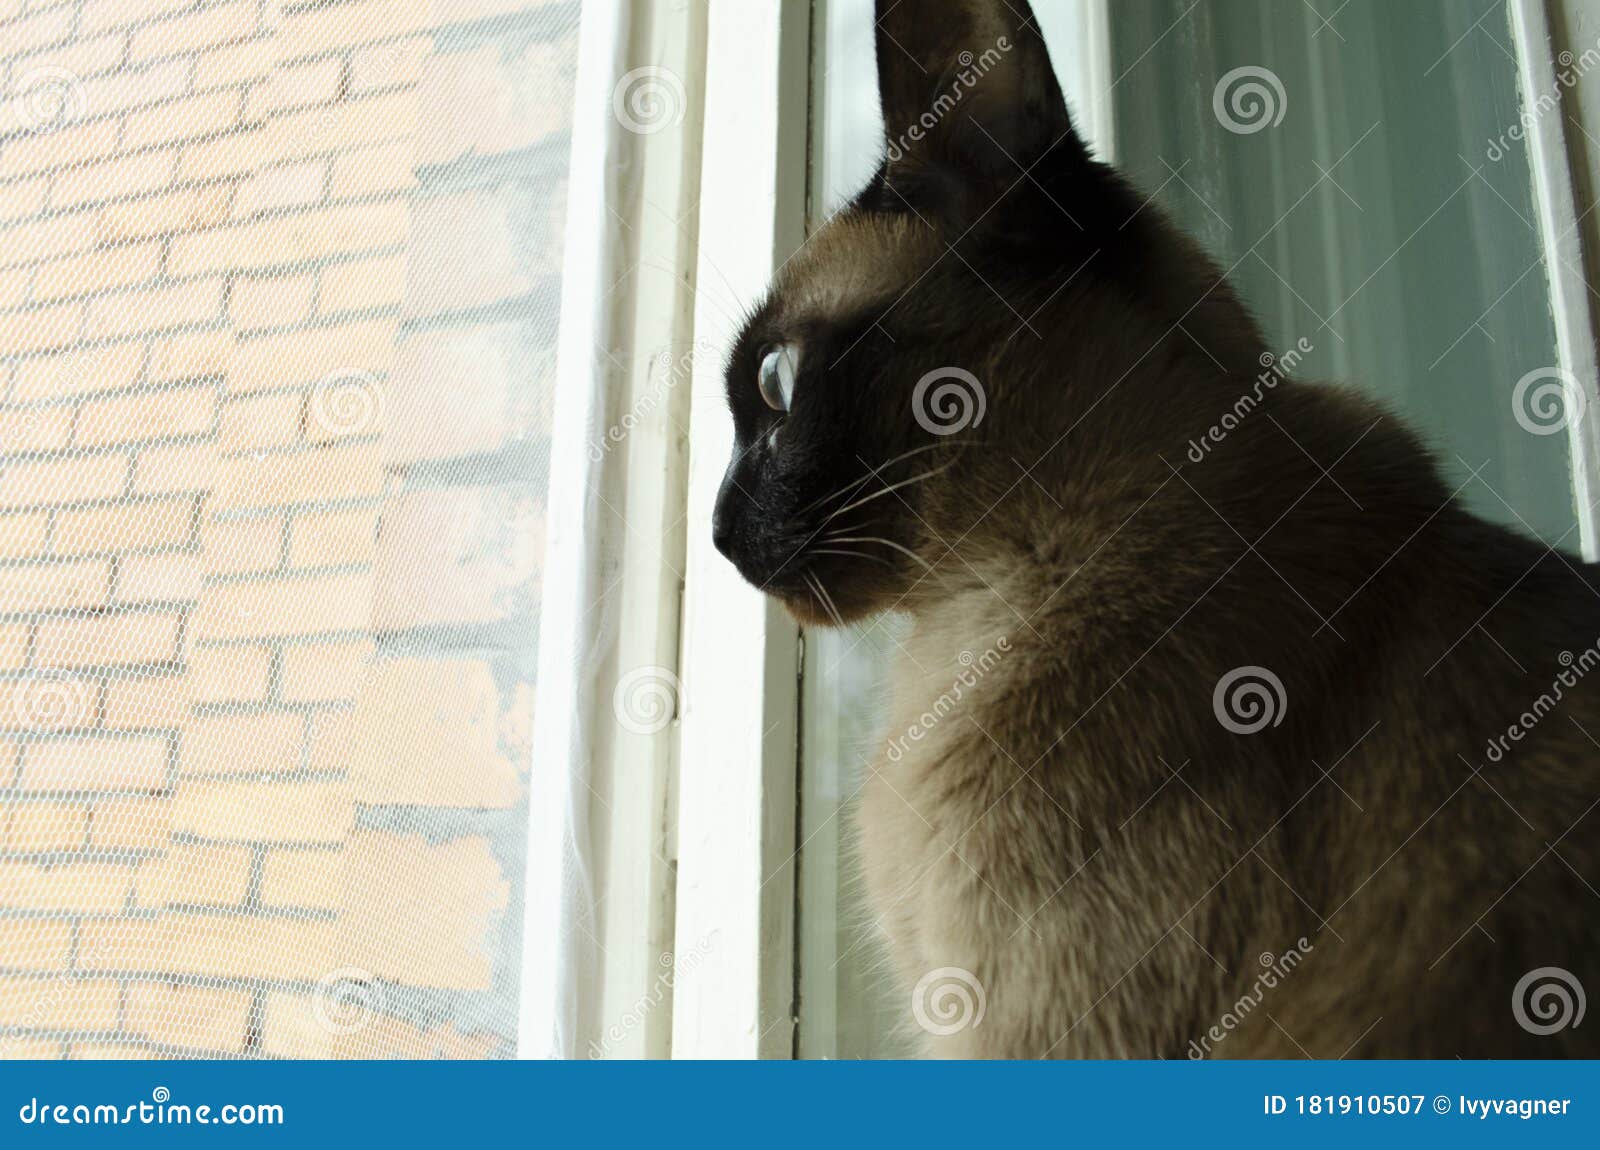 Burmese Cat Sitting At Home And Looking At Window Stock Image Image Of Siamese Blue 181910507